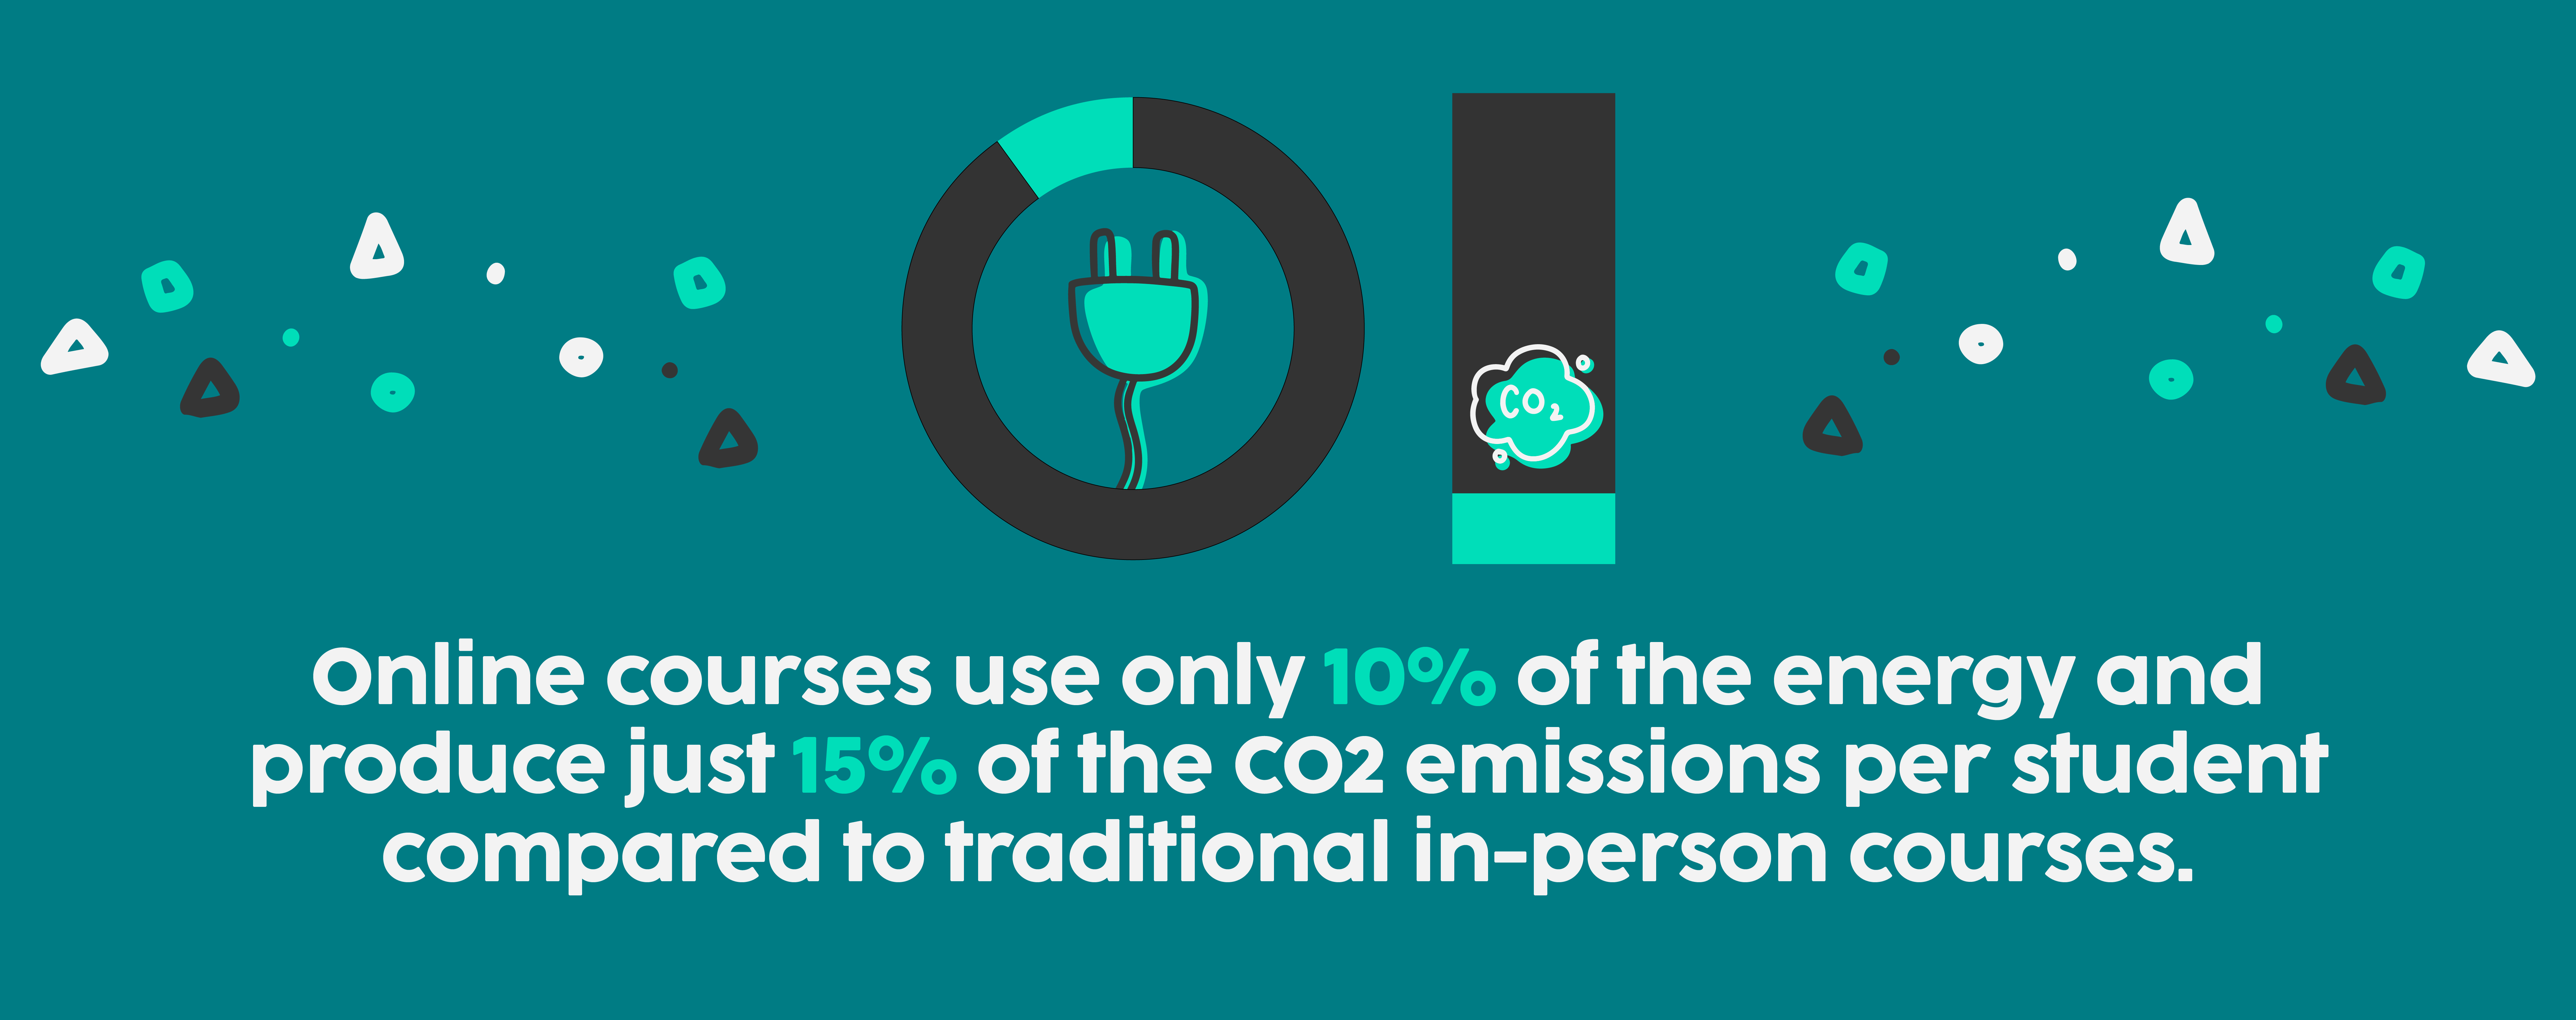 Online courses have a significantly smaller environmental footprint, using only 10% of the energy and producing just 15% of the CO2 emissions per student compared to traditional in-person courses.